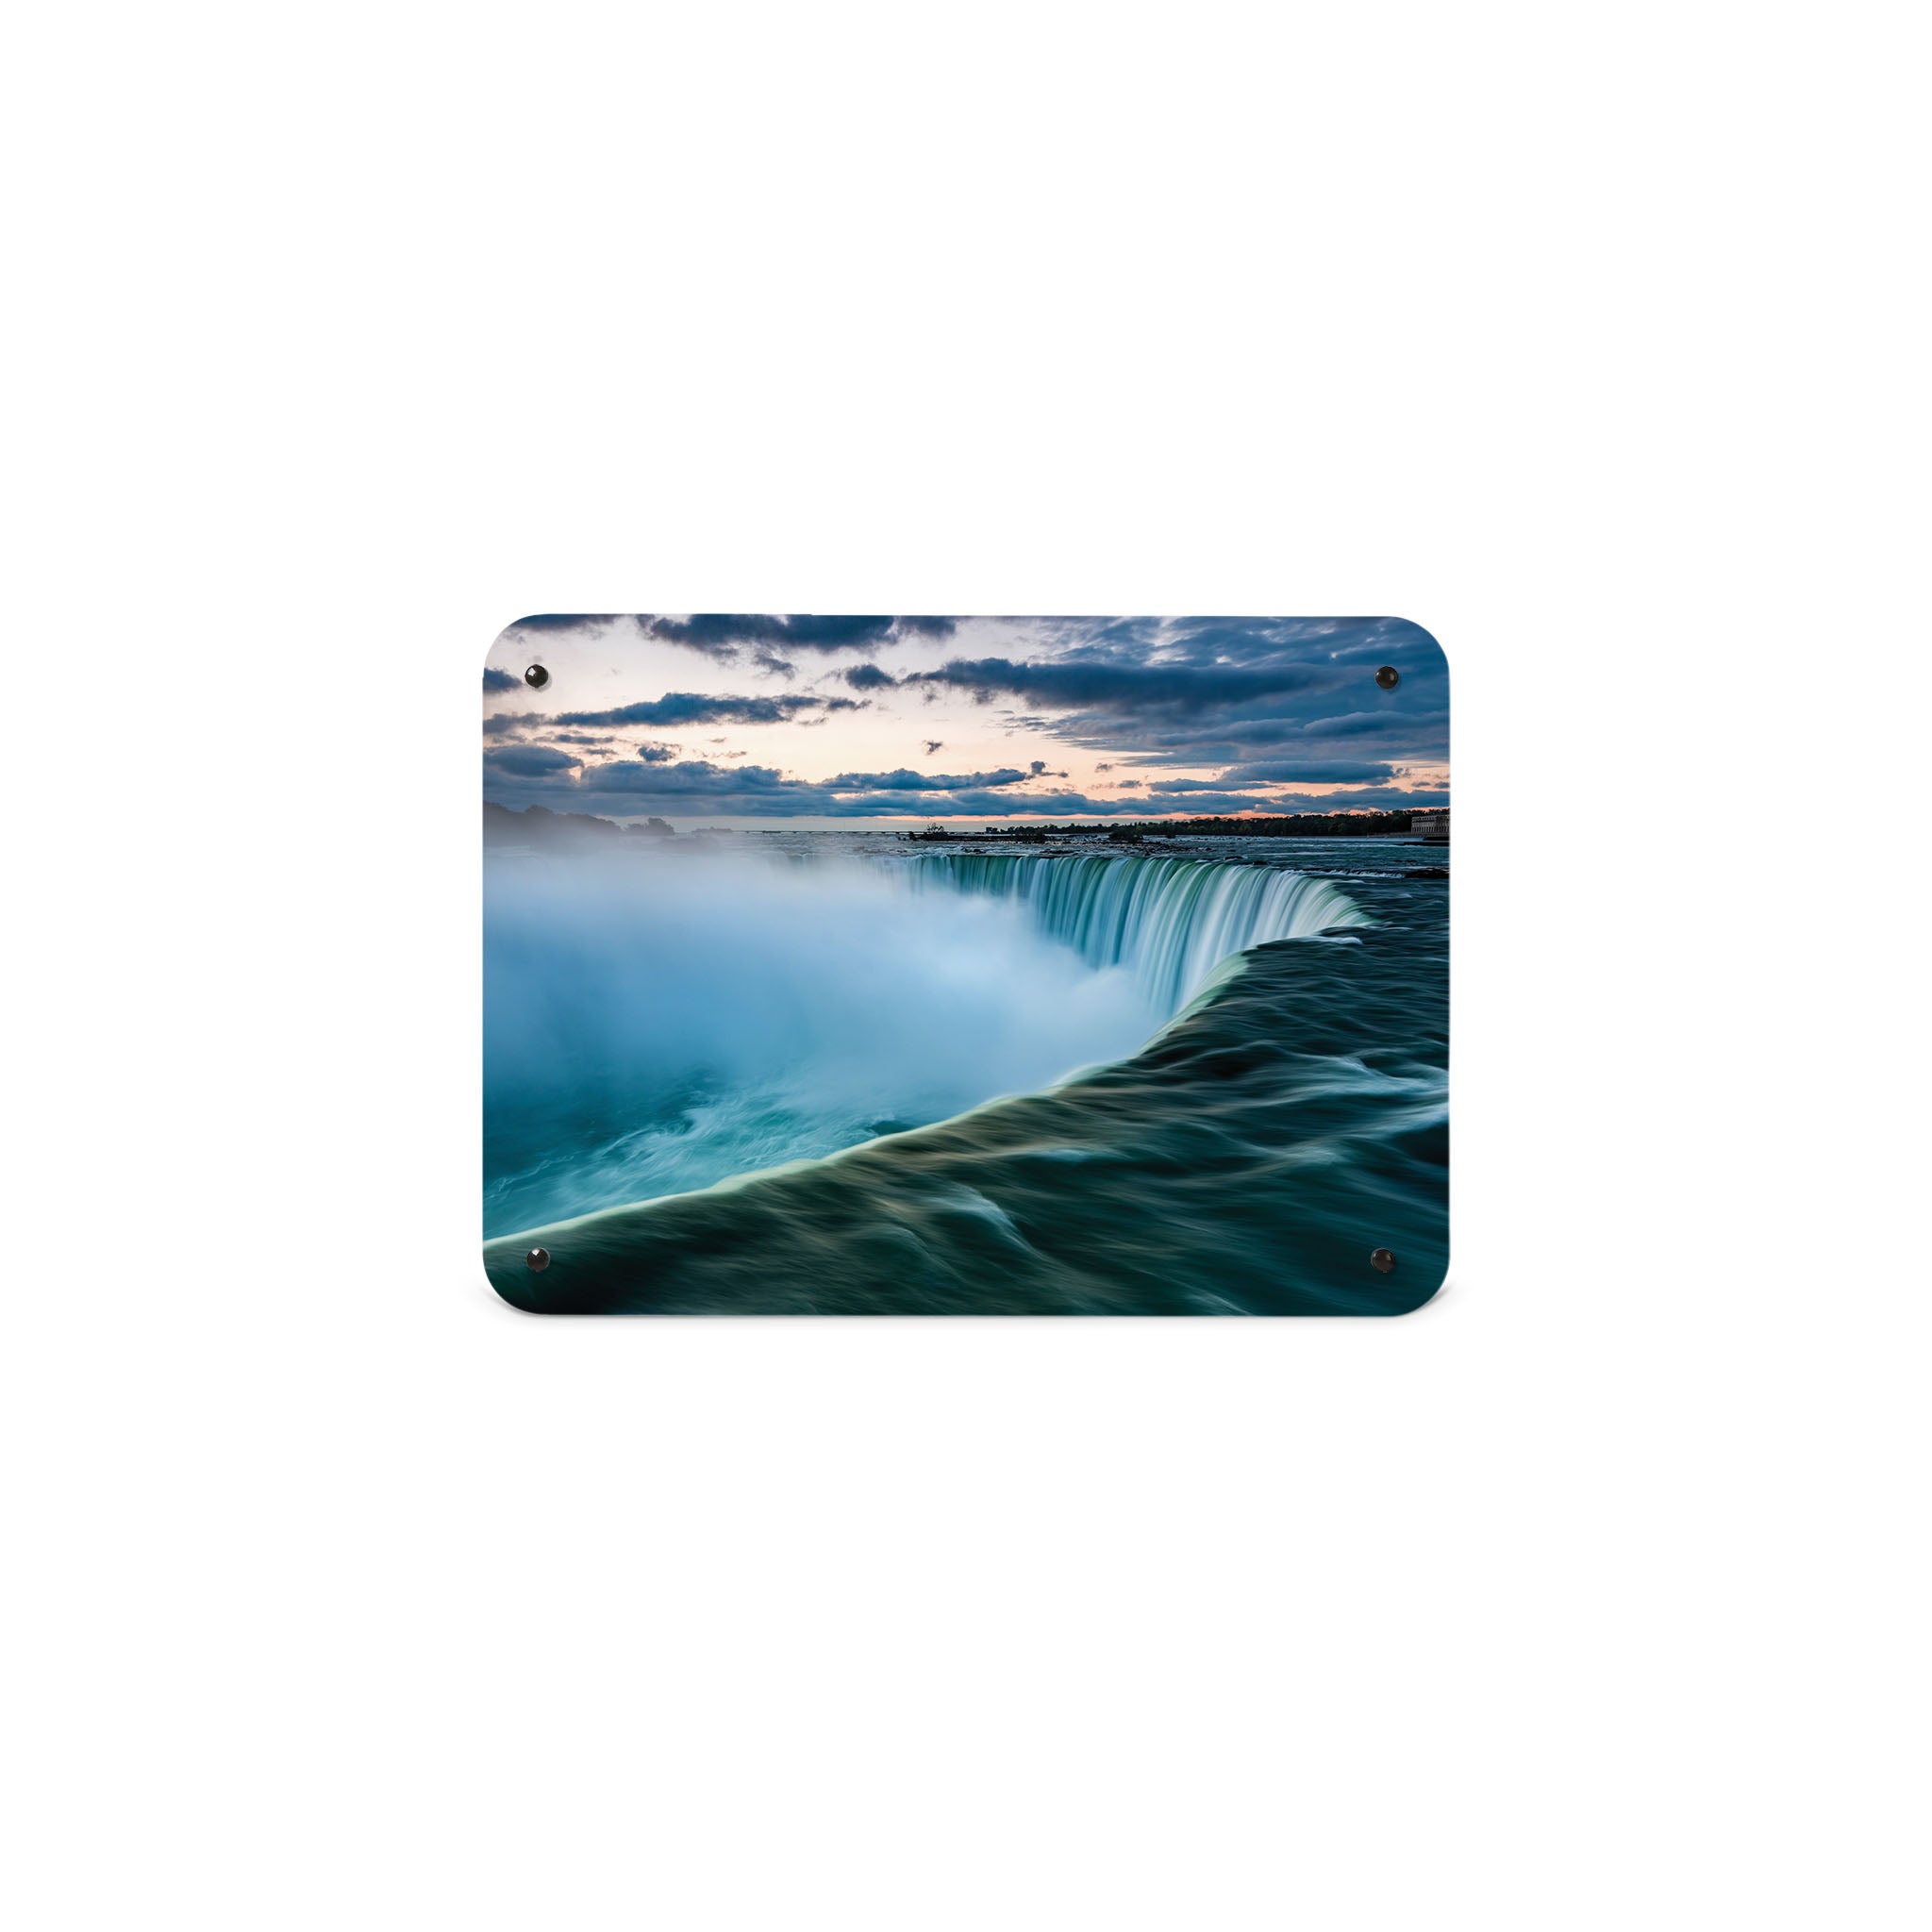 A small magnetic notice board by Beyond the Fridge with a photograph of the Niagara Falls